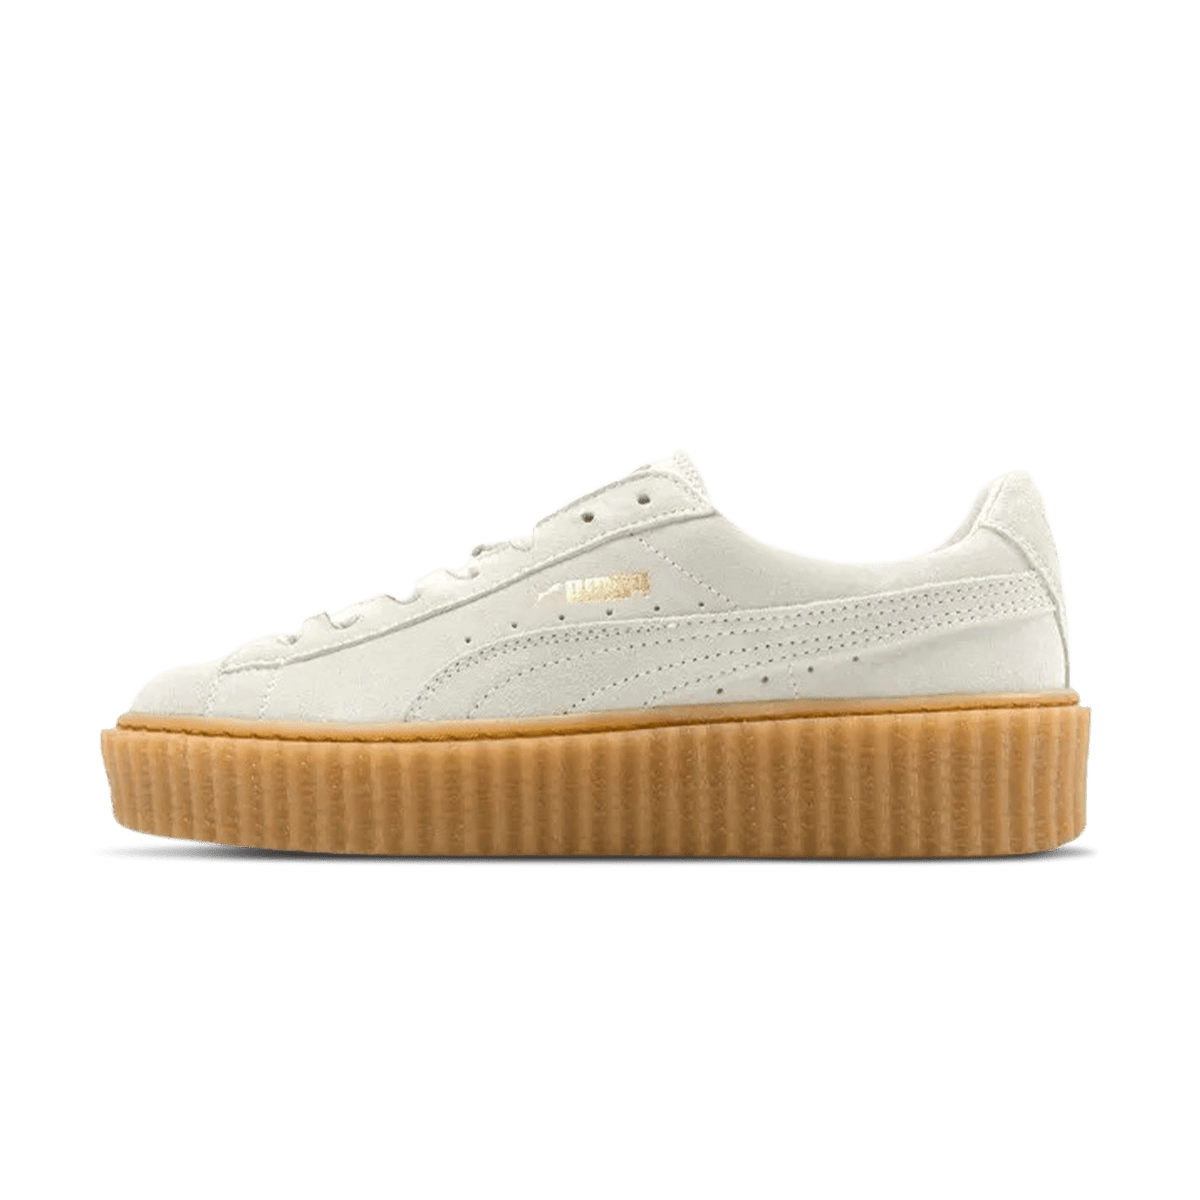 Fenty x Wmns Suede Creepers 'Star White' - Kick Game